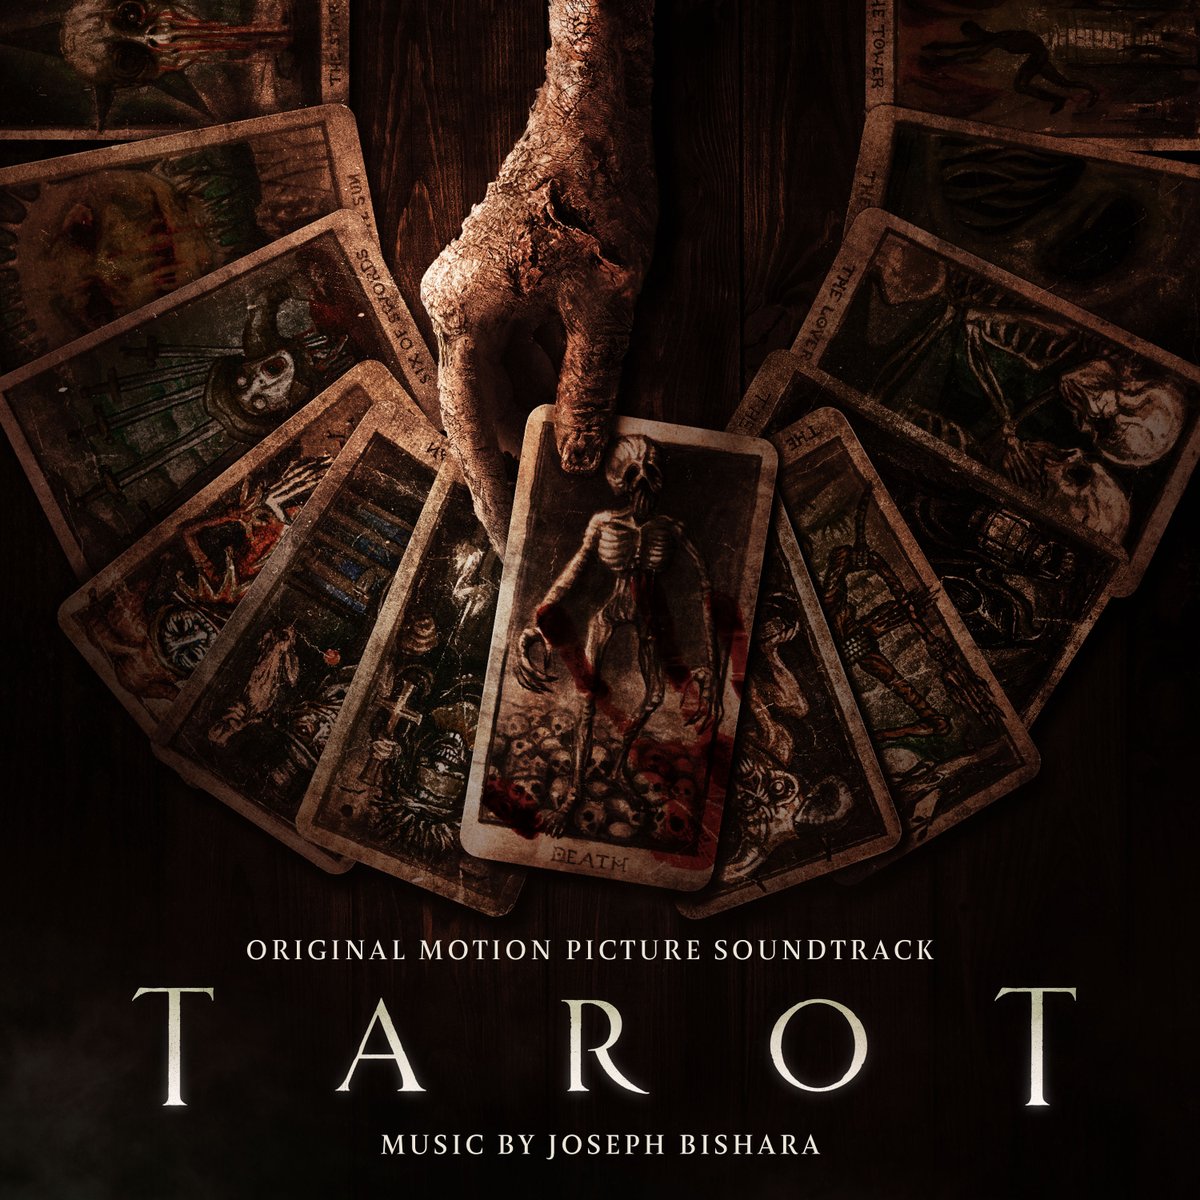 the thrilling new tarot score album by joseph bishara is out now. listen here… if you’re feeling brave: soundtrk.lnk.to/Tarot see #TarotMovie, now playing exclusively in theaters.